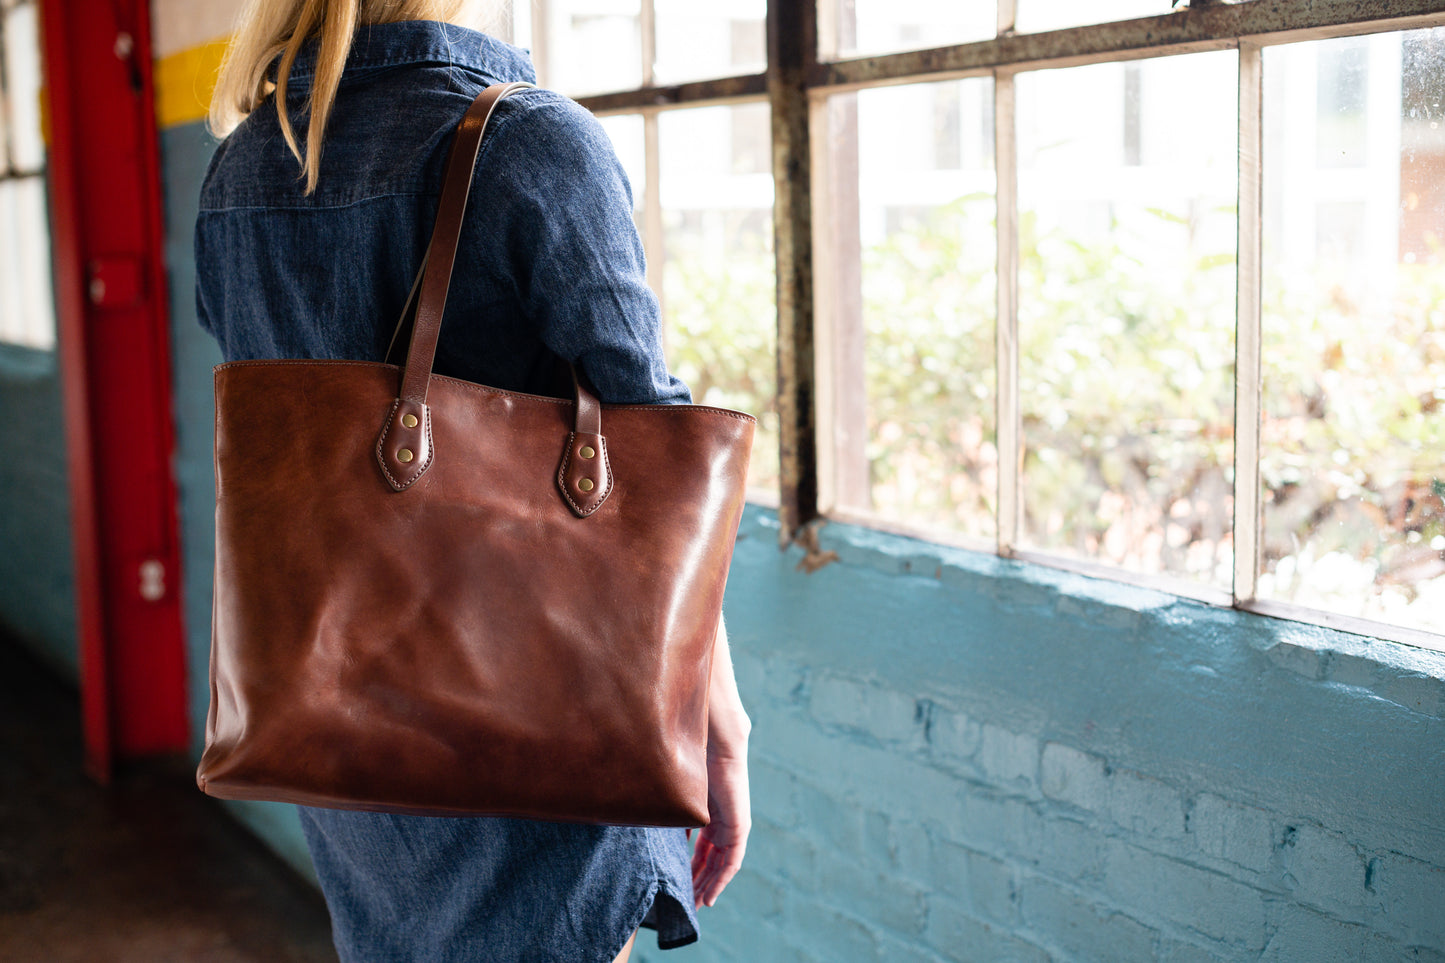 Franklin Market Tote Bag by Jackson Wayne - full grain leather with canvas lining